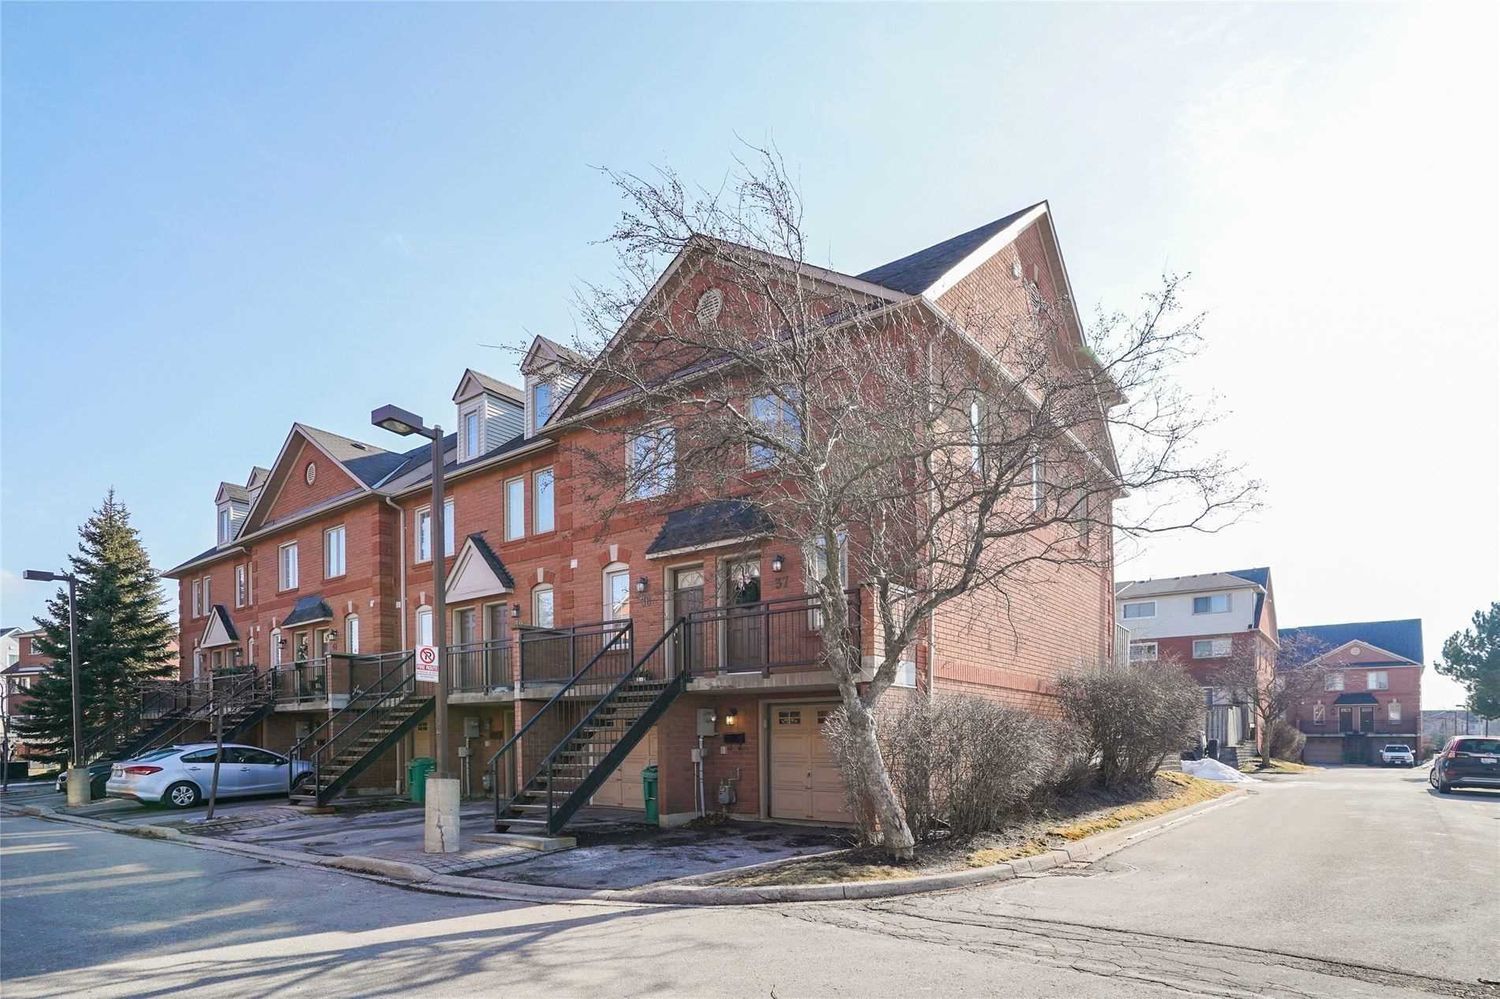 3895 Doug Leavens Boulevard. 3895 Doug Leavens Boulevard Townhomes is located in  Mississauga, Toronto - image #2 of 3